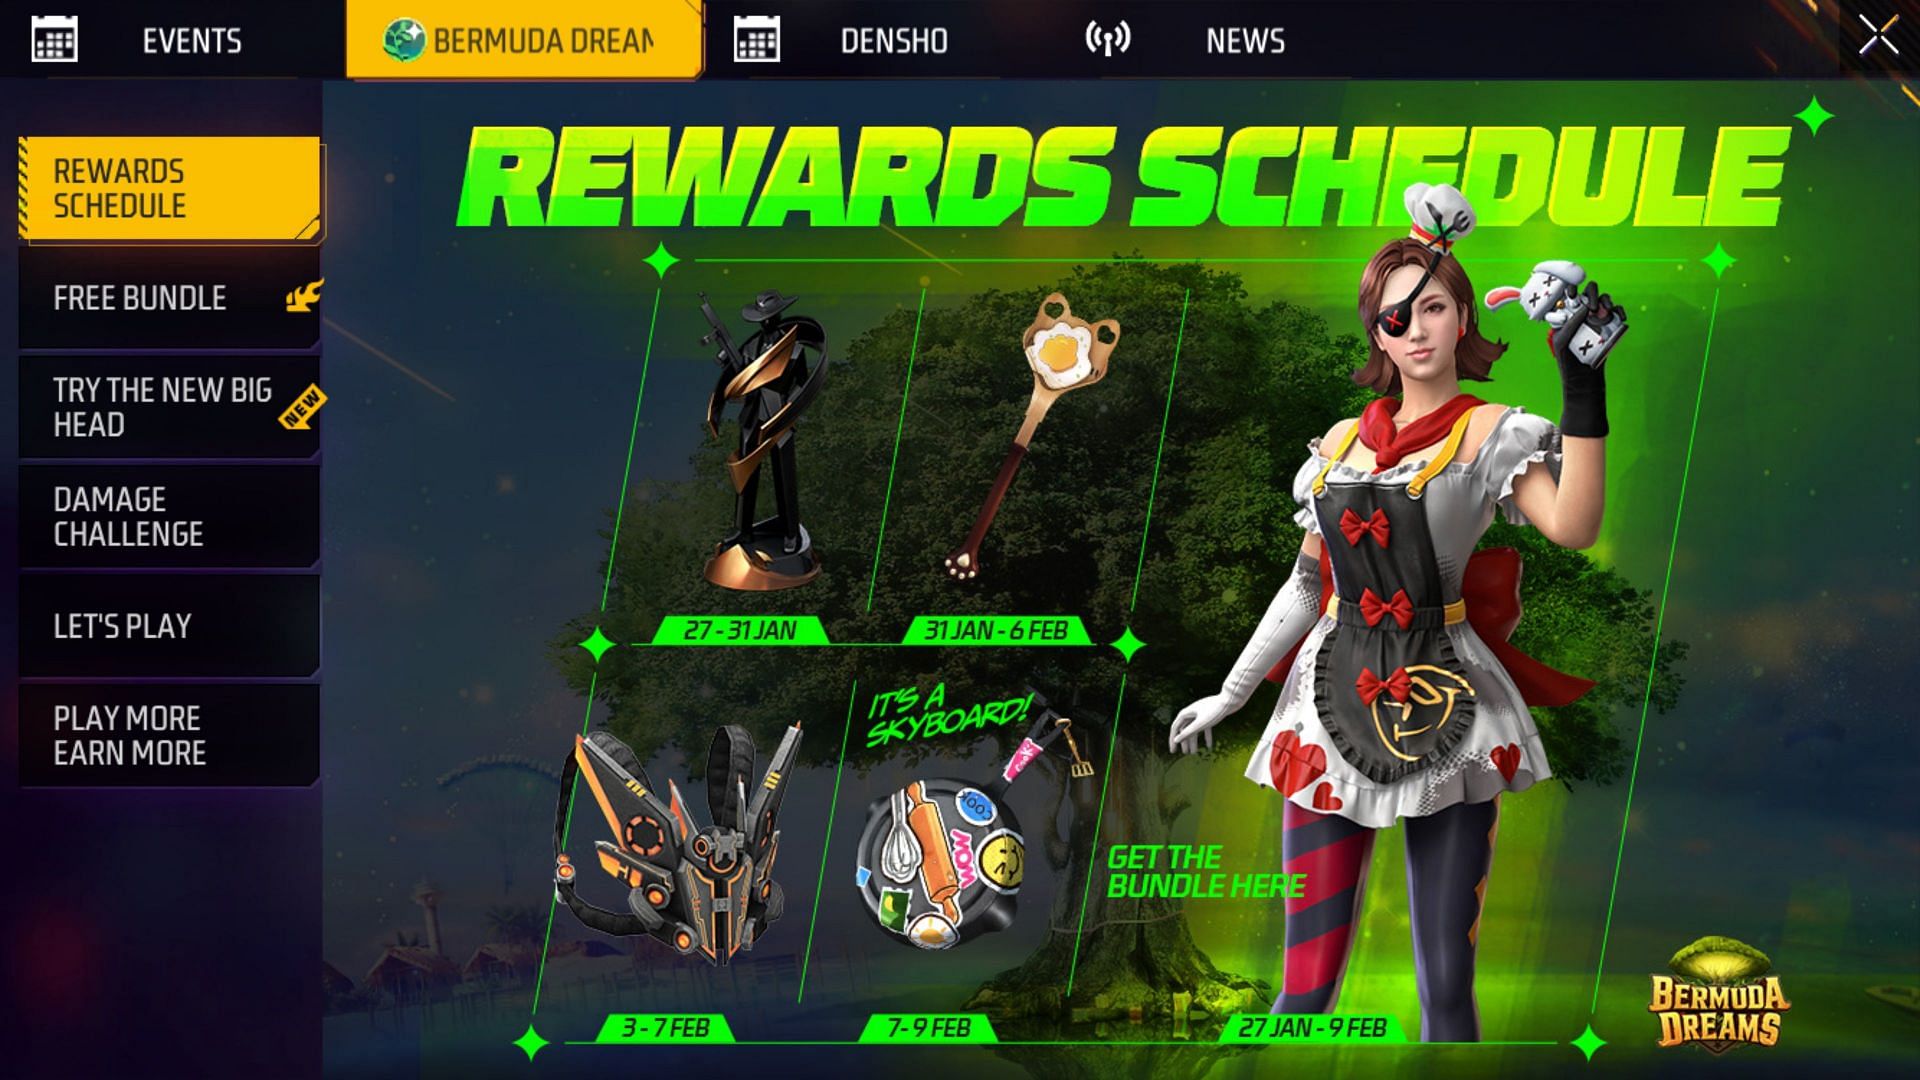 You will have to select the Try the New Big Head event (Image via Garena)